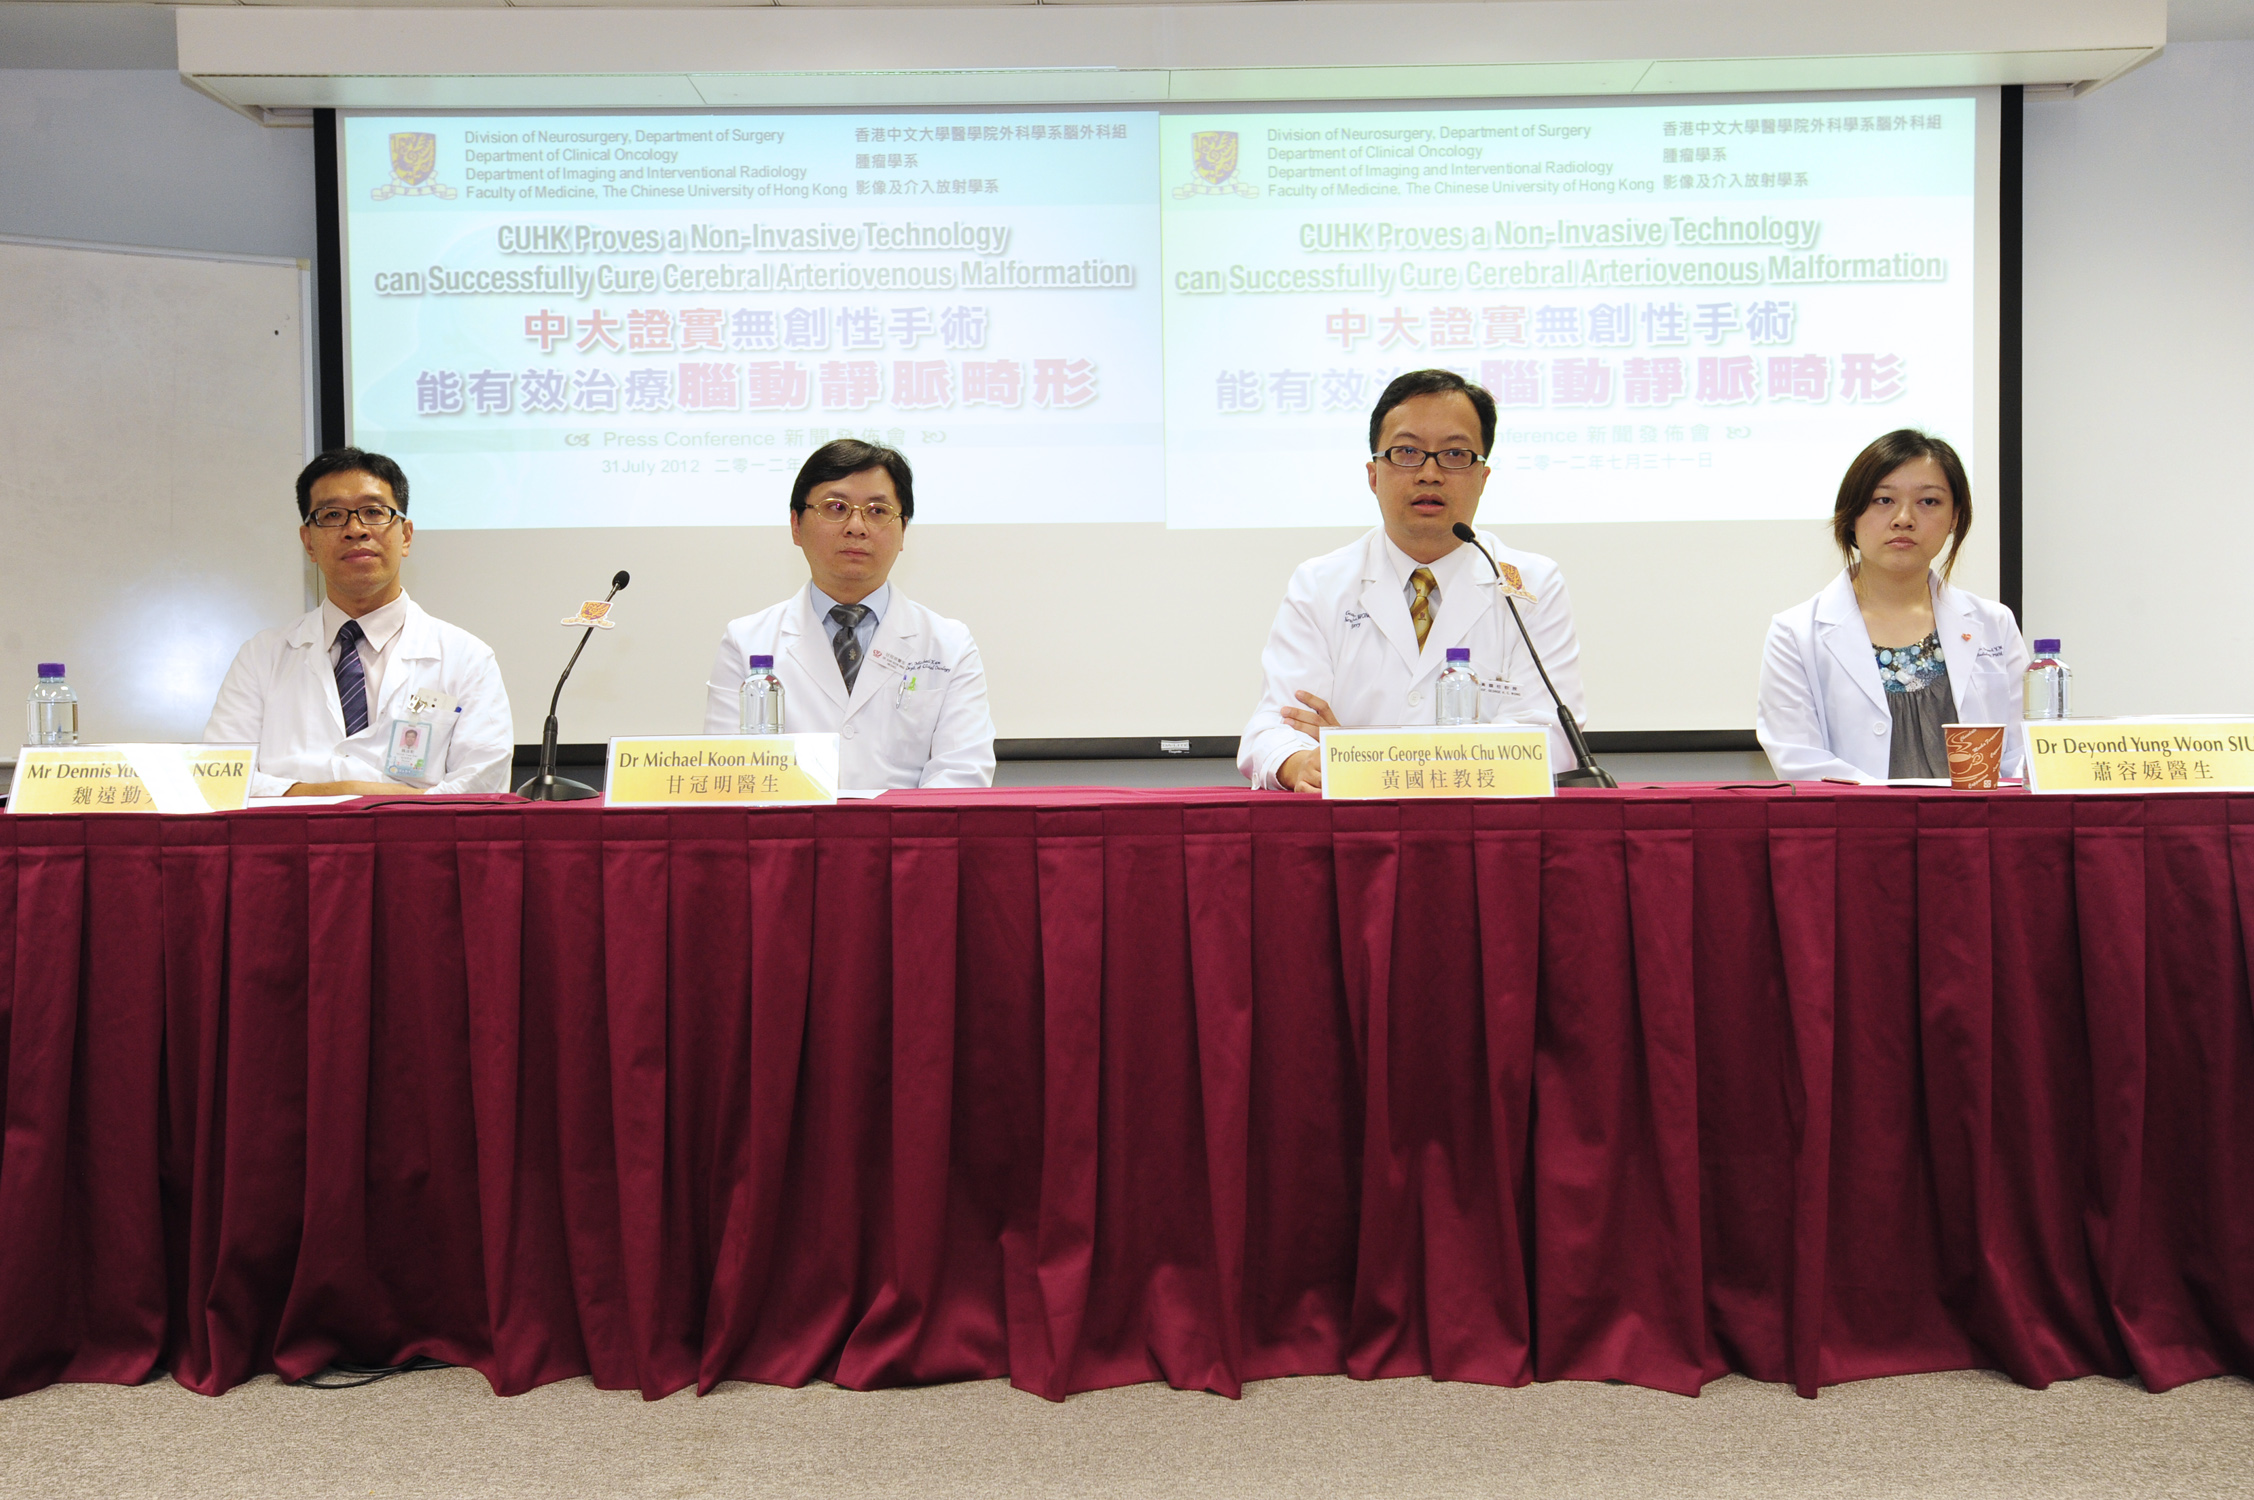 From Left: Mr Dennis Yuen Kan NGAR, Medical Physicist, Department of Clinical Oncology; Dr Michael Koon Ming KAM, Clinical Associate Professor (honorary), Department of Clinical Oncology; Prof George Kwok Chu WONG, Professor, Division of Neurosurgery, Department of Surgery and Dr Deyond Yung Woon SIU, Clinical Assistant Professor (honorary), Department of Imaging and Interventional Radiology jointly present their recent research findings on how a non-invasive technology can cure cerebral arteriovenous malformation